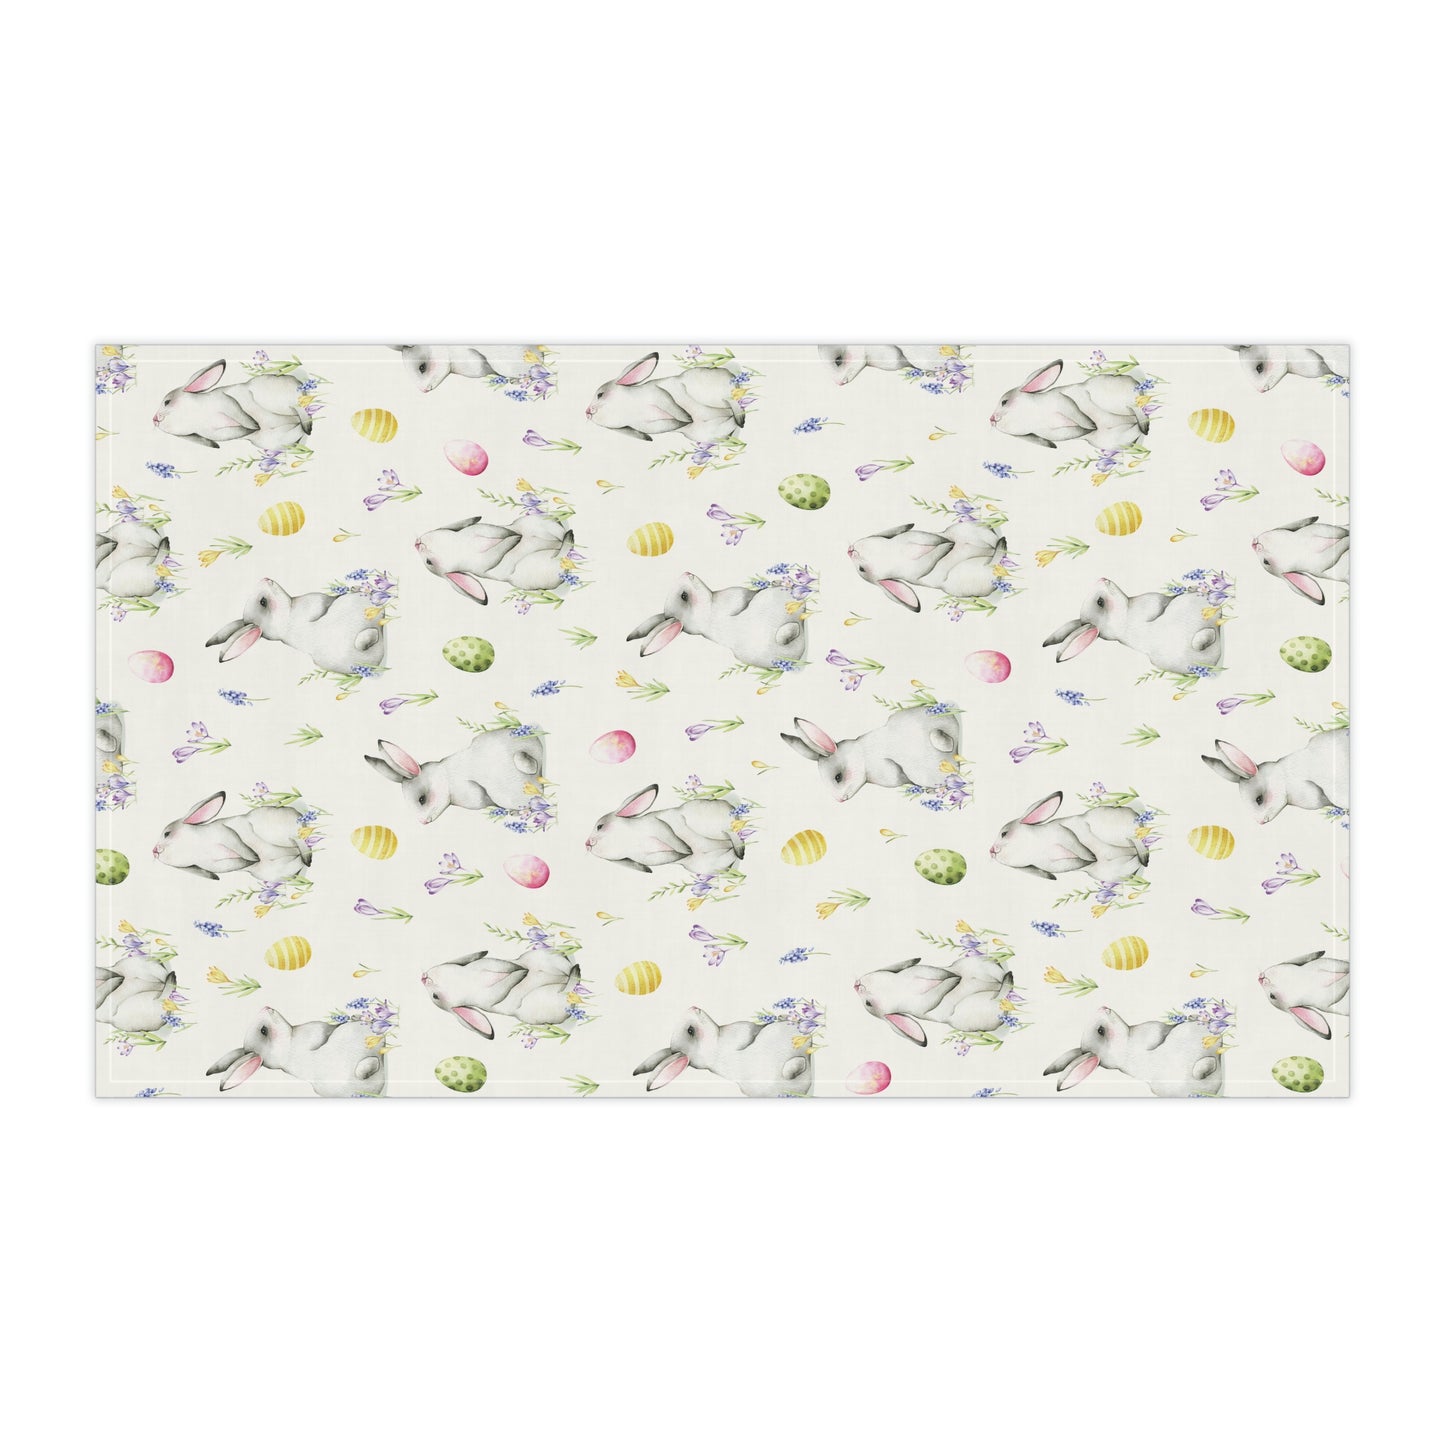 Cottontail Bunnies and Eggs Kitchen Towel